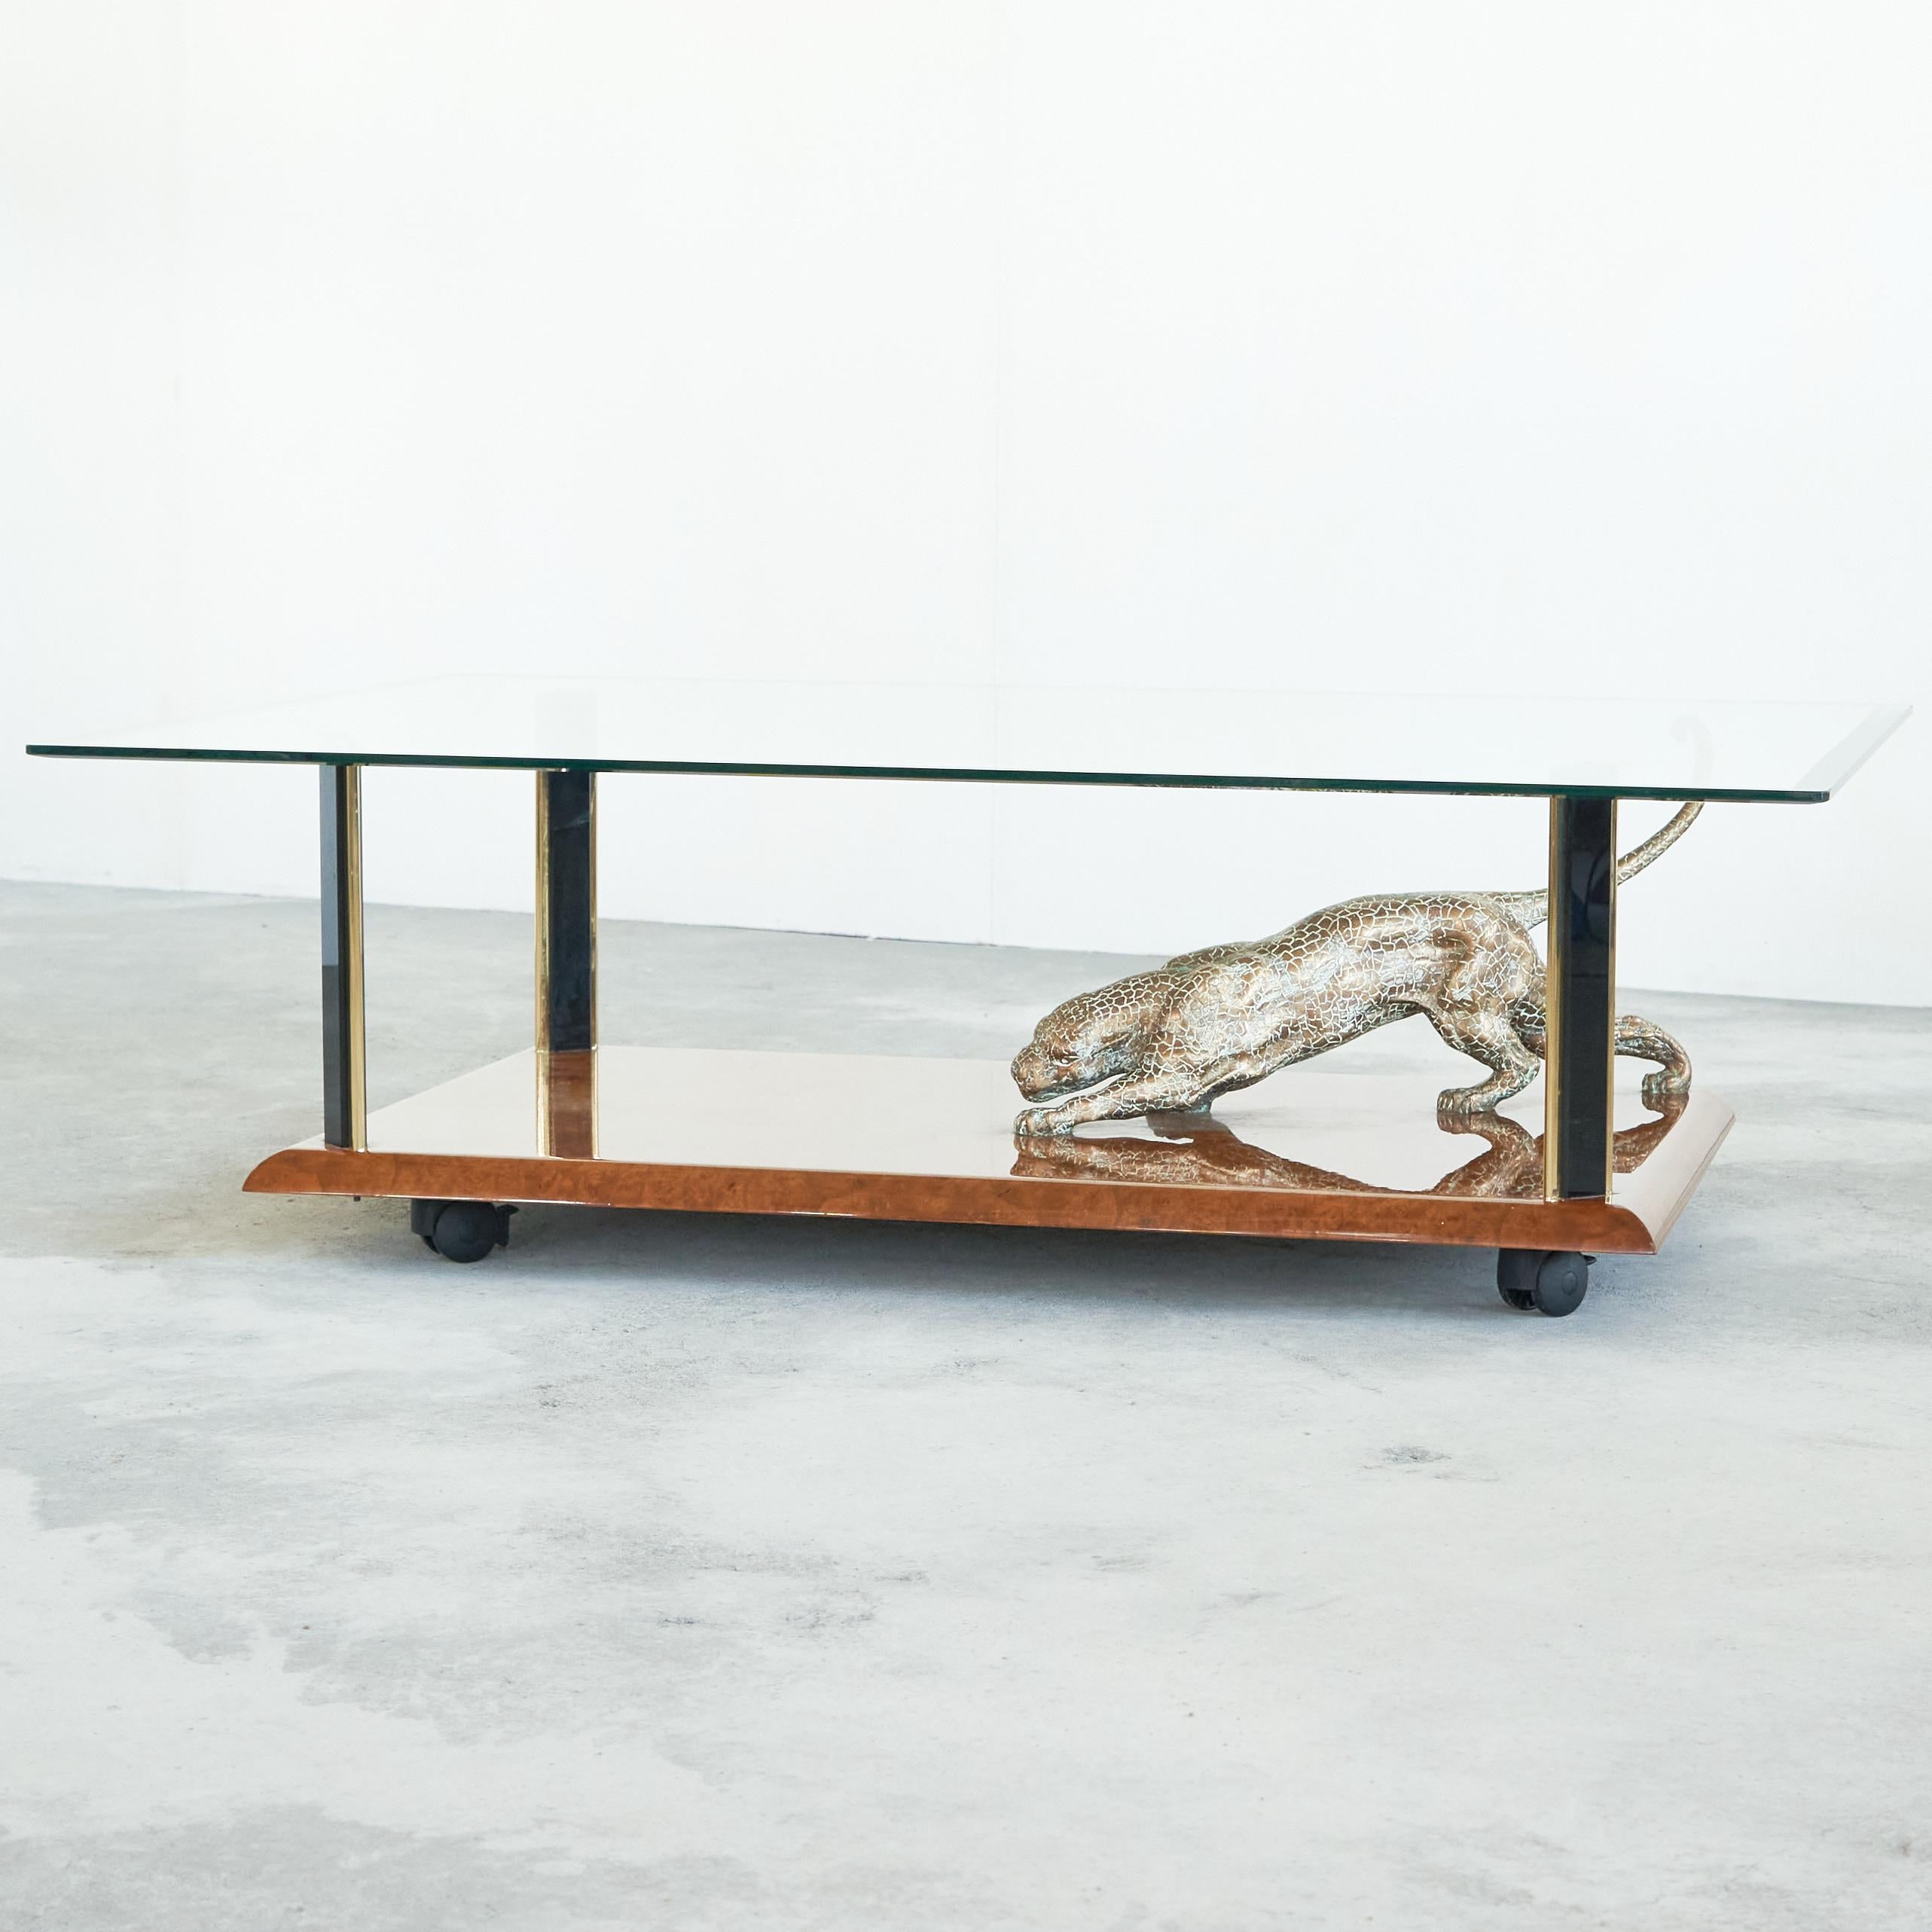 Brass Nicola Voci 'Jaguar' Coffee Table in Bronze, Burl Wood and Beveled Glass 1970s For Sale